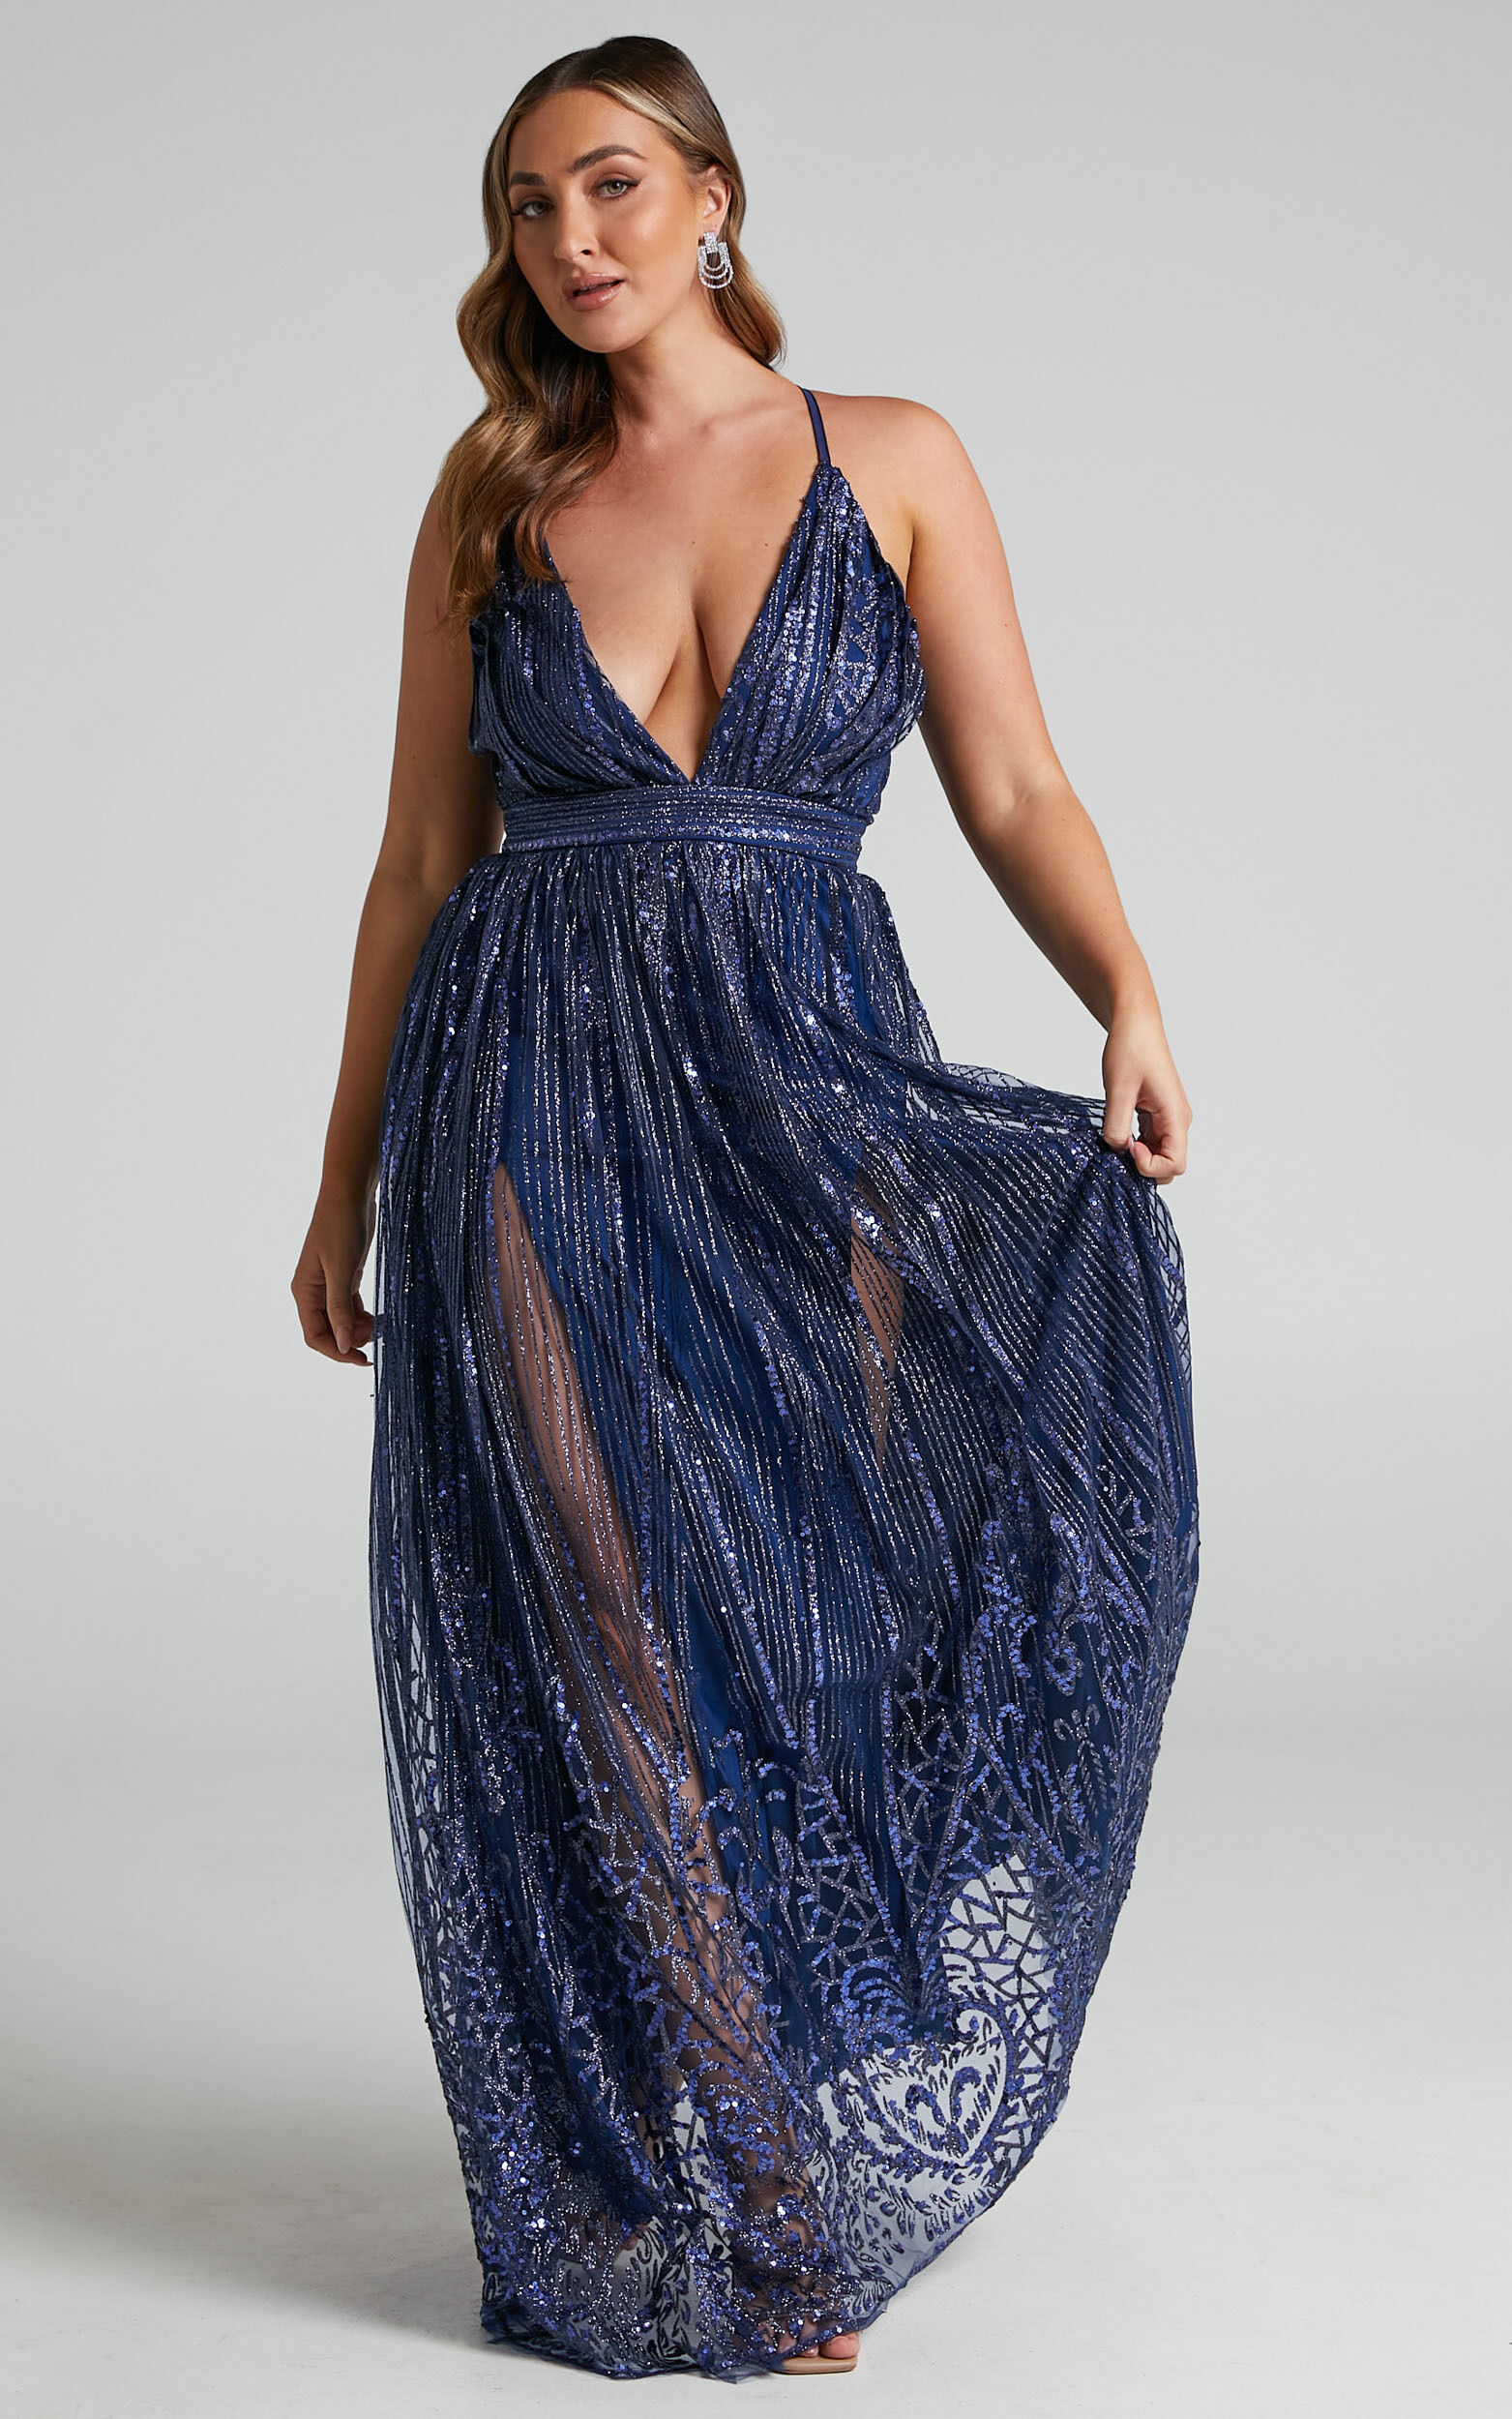 Paola Maxi Dress - Metallic Plunge Dress in Navy - 04, NVY3